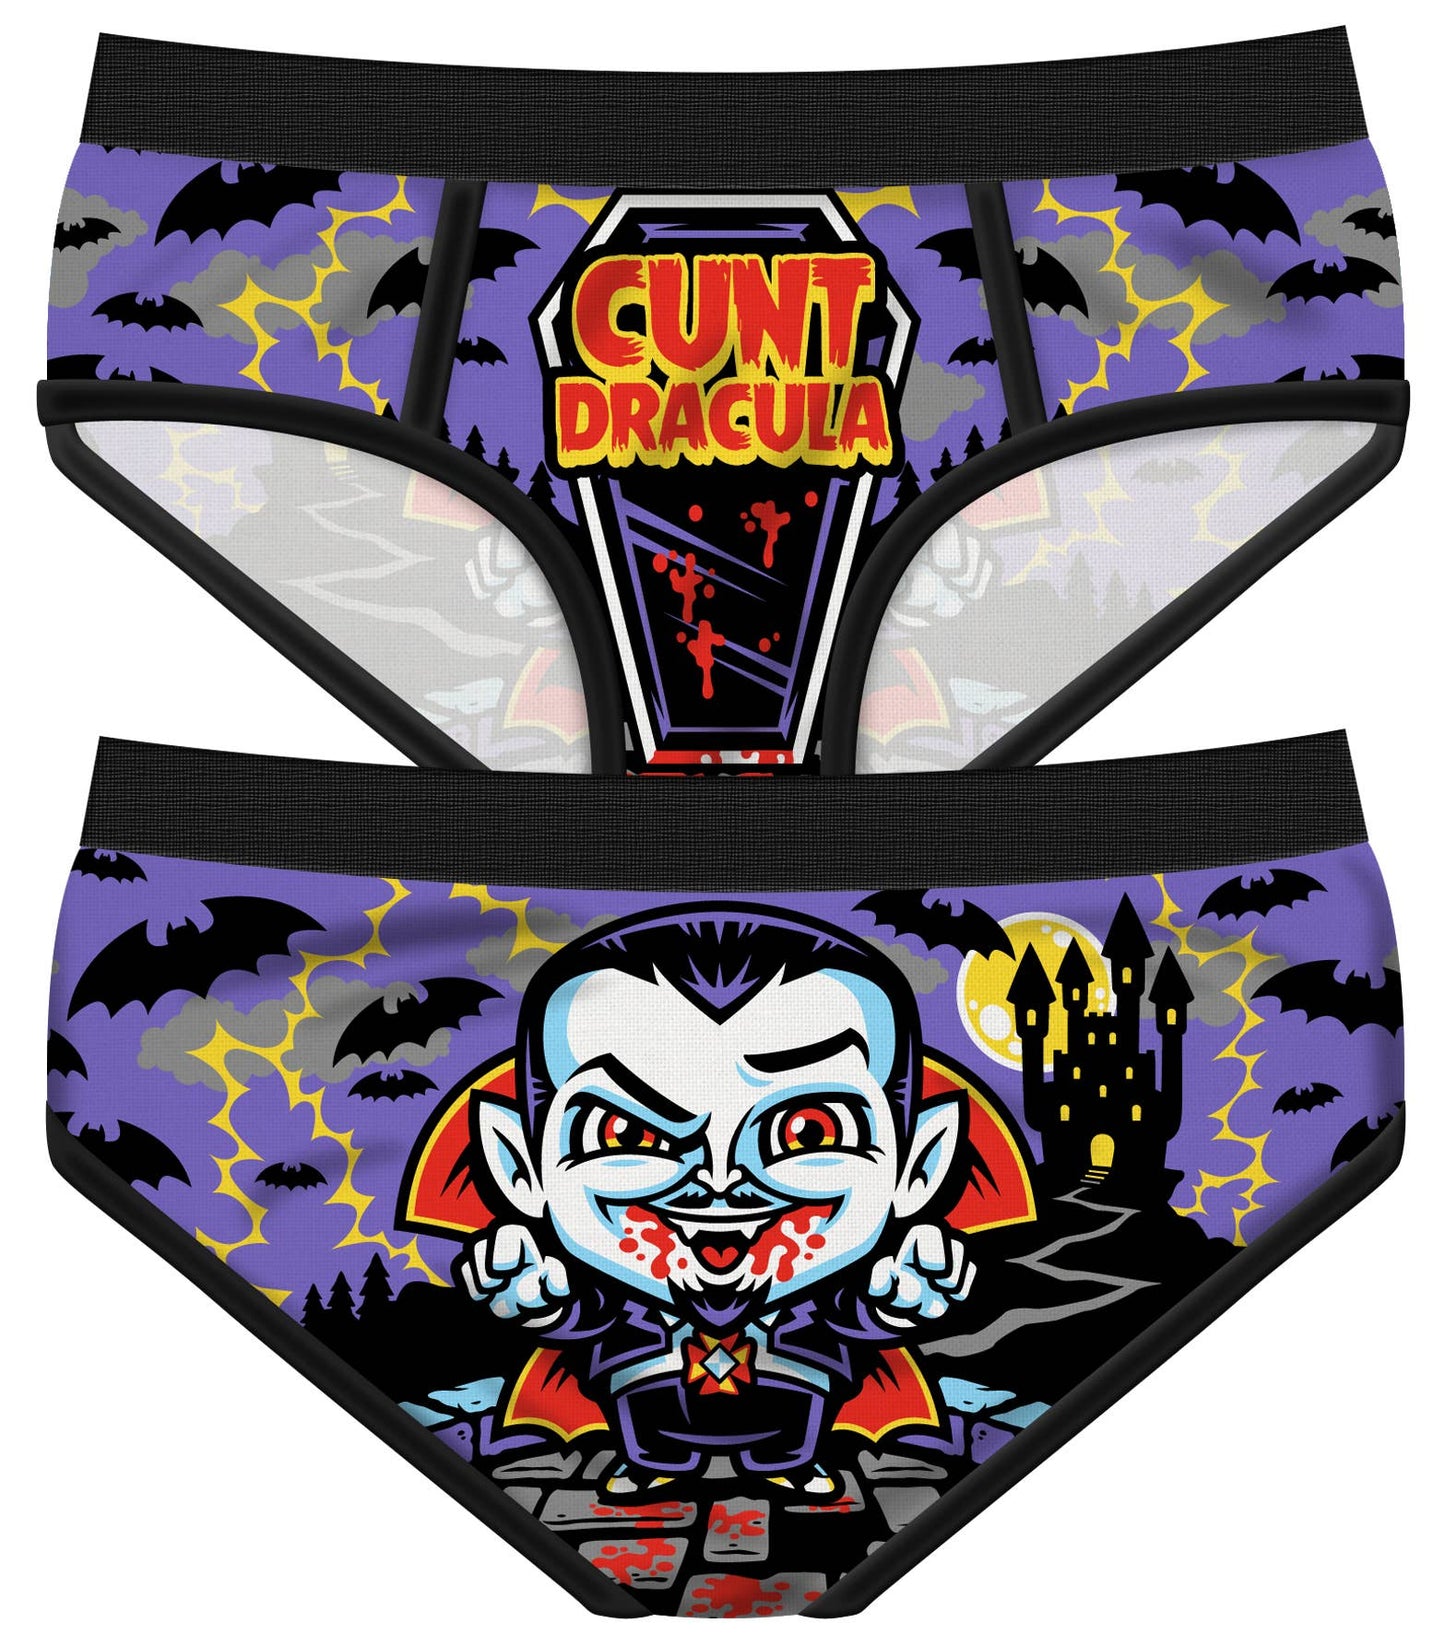 Harebrained! - Cunt Dracula Period Panties - The Oddity Den